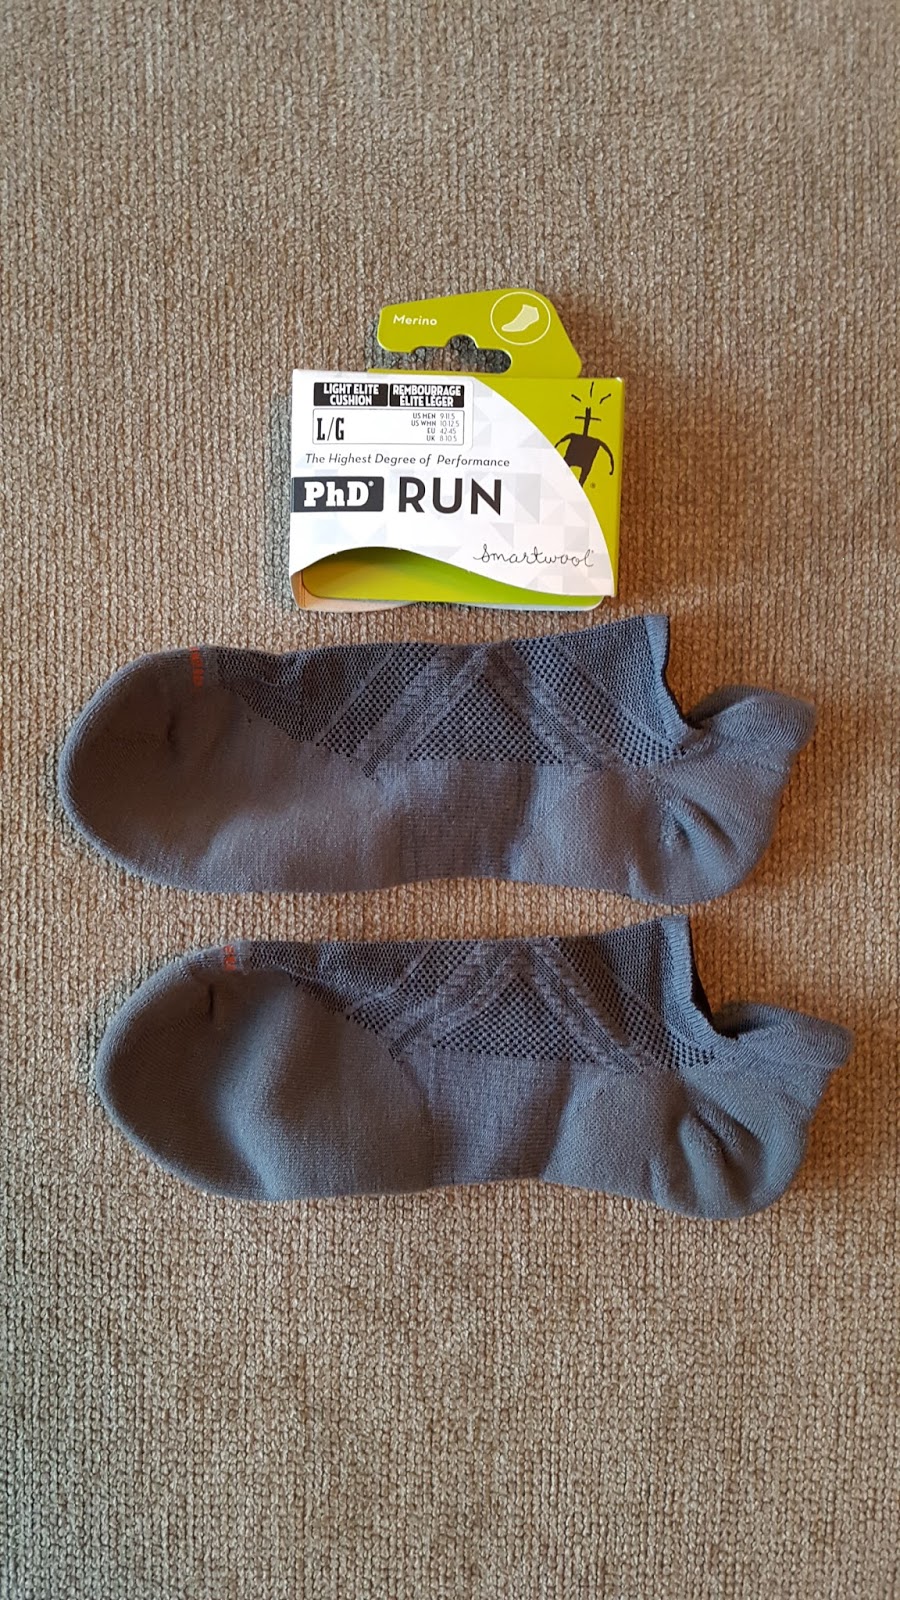 Running Without Injuries: SmartWool PhD Running Gear Review